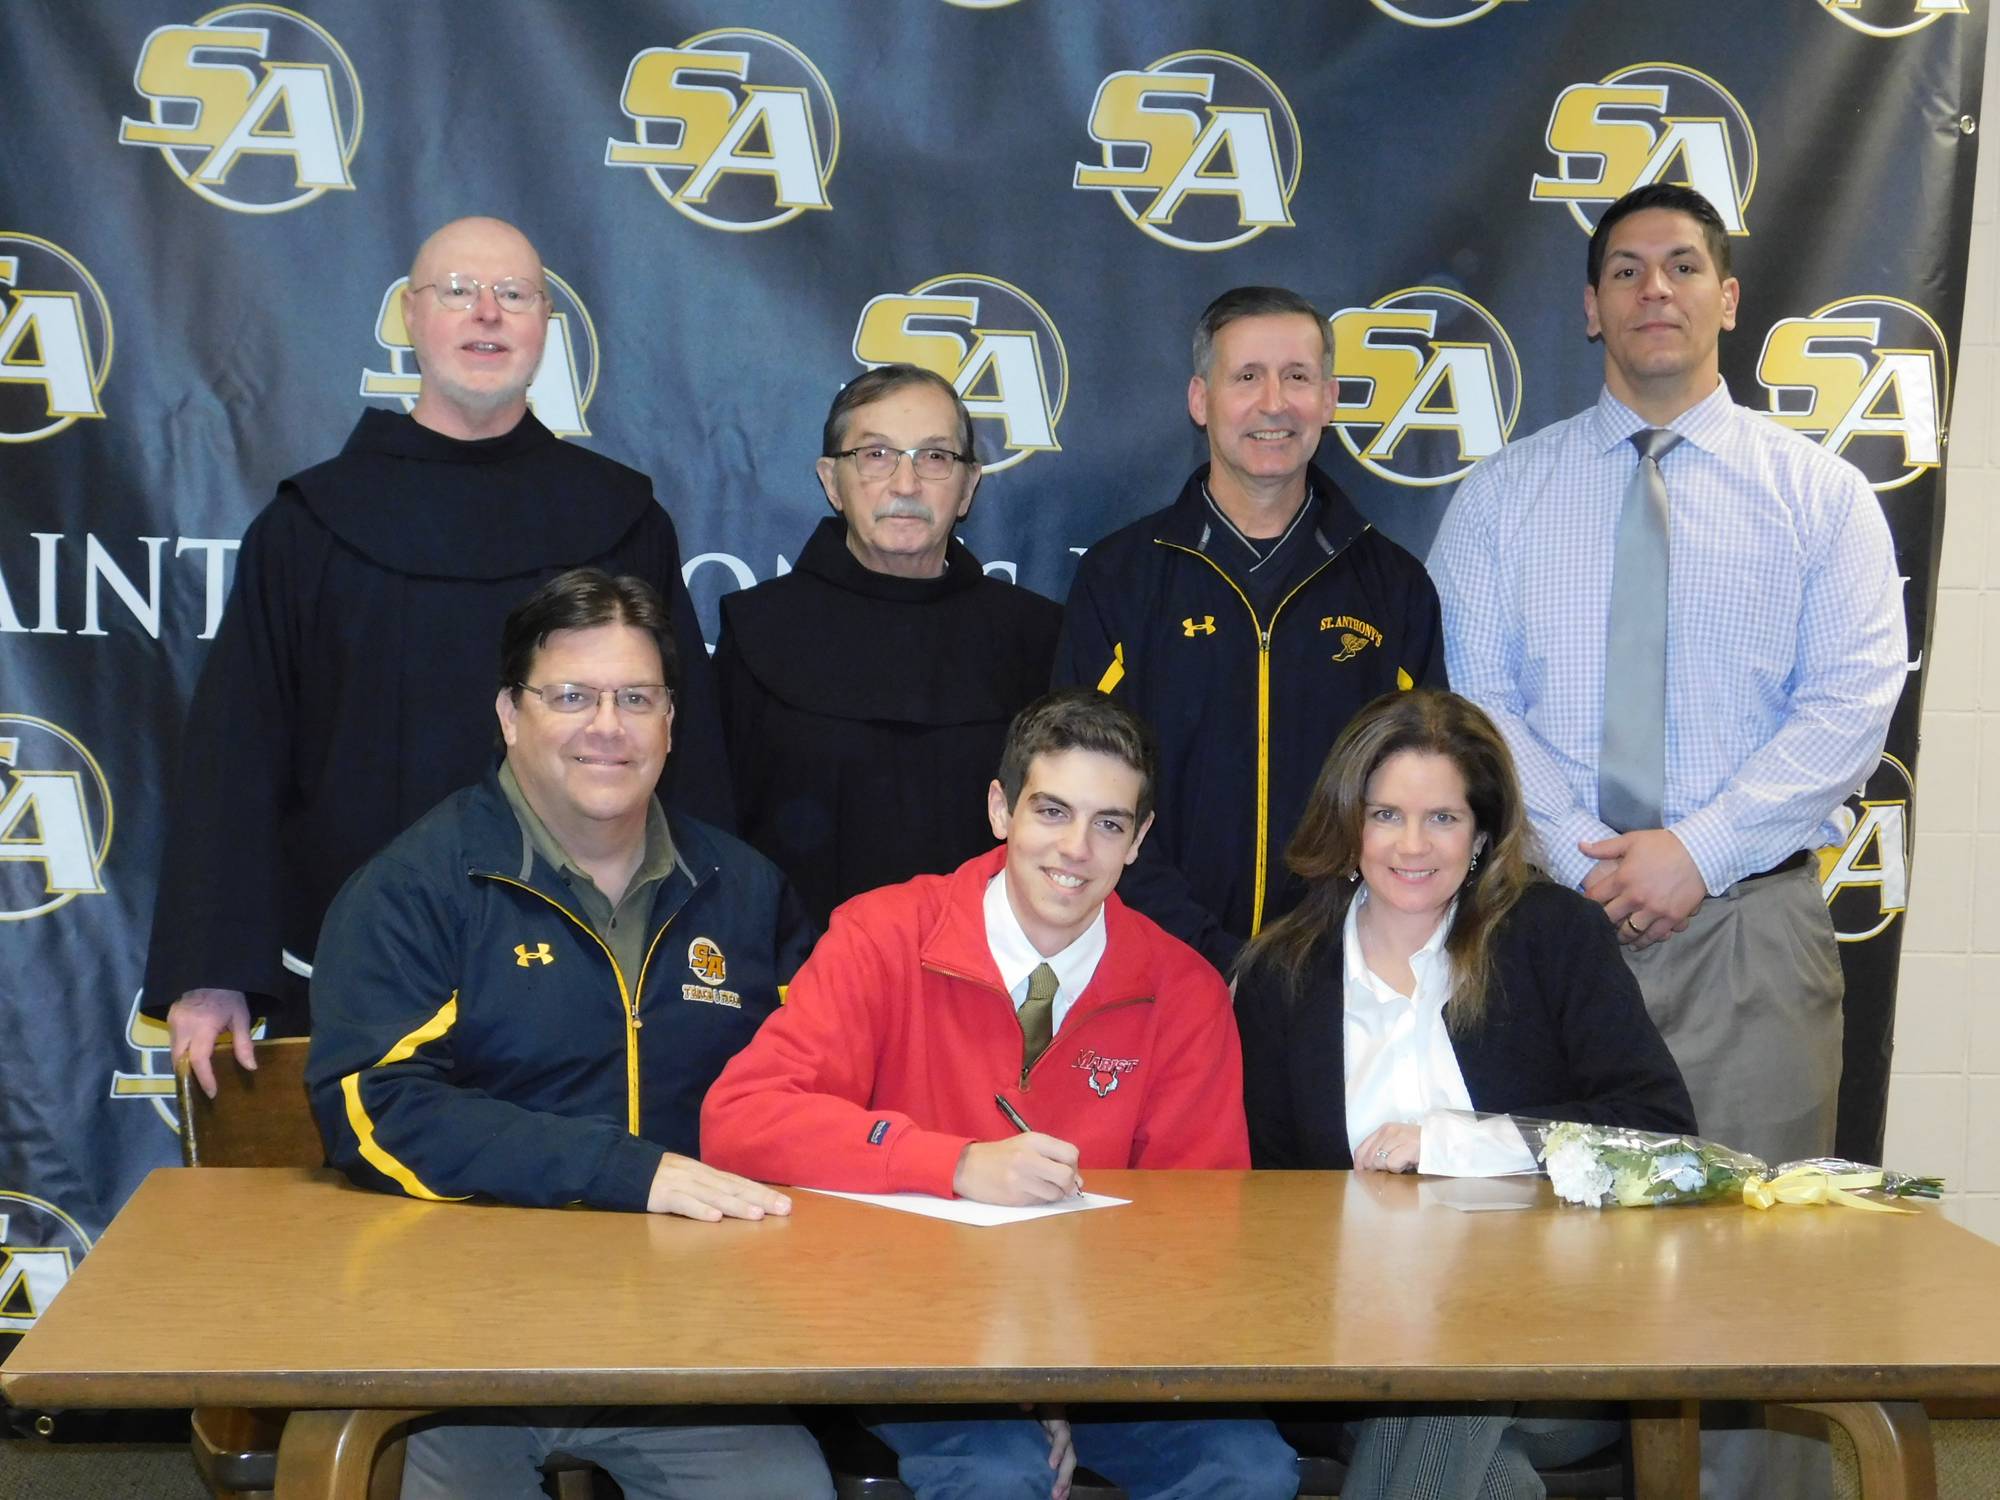 Congratulations to Brendan Dearie on his commitment to Marist College for Cross Country, Track & Field